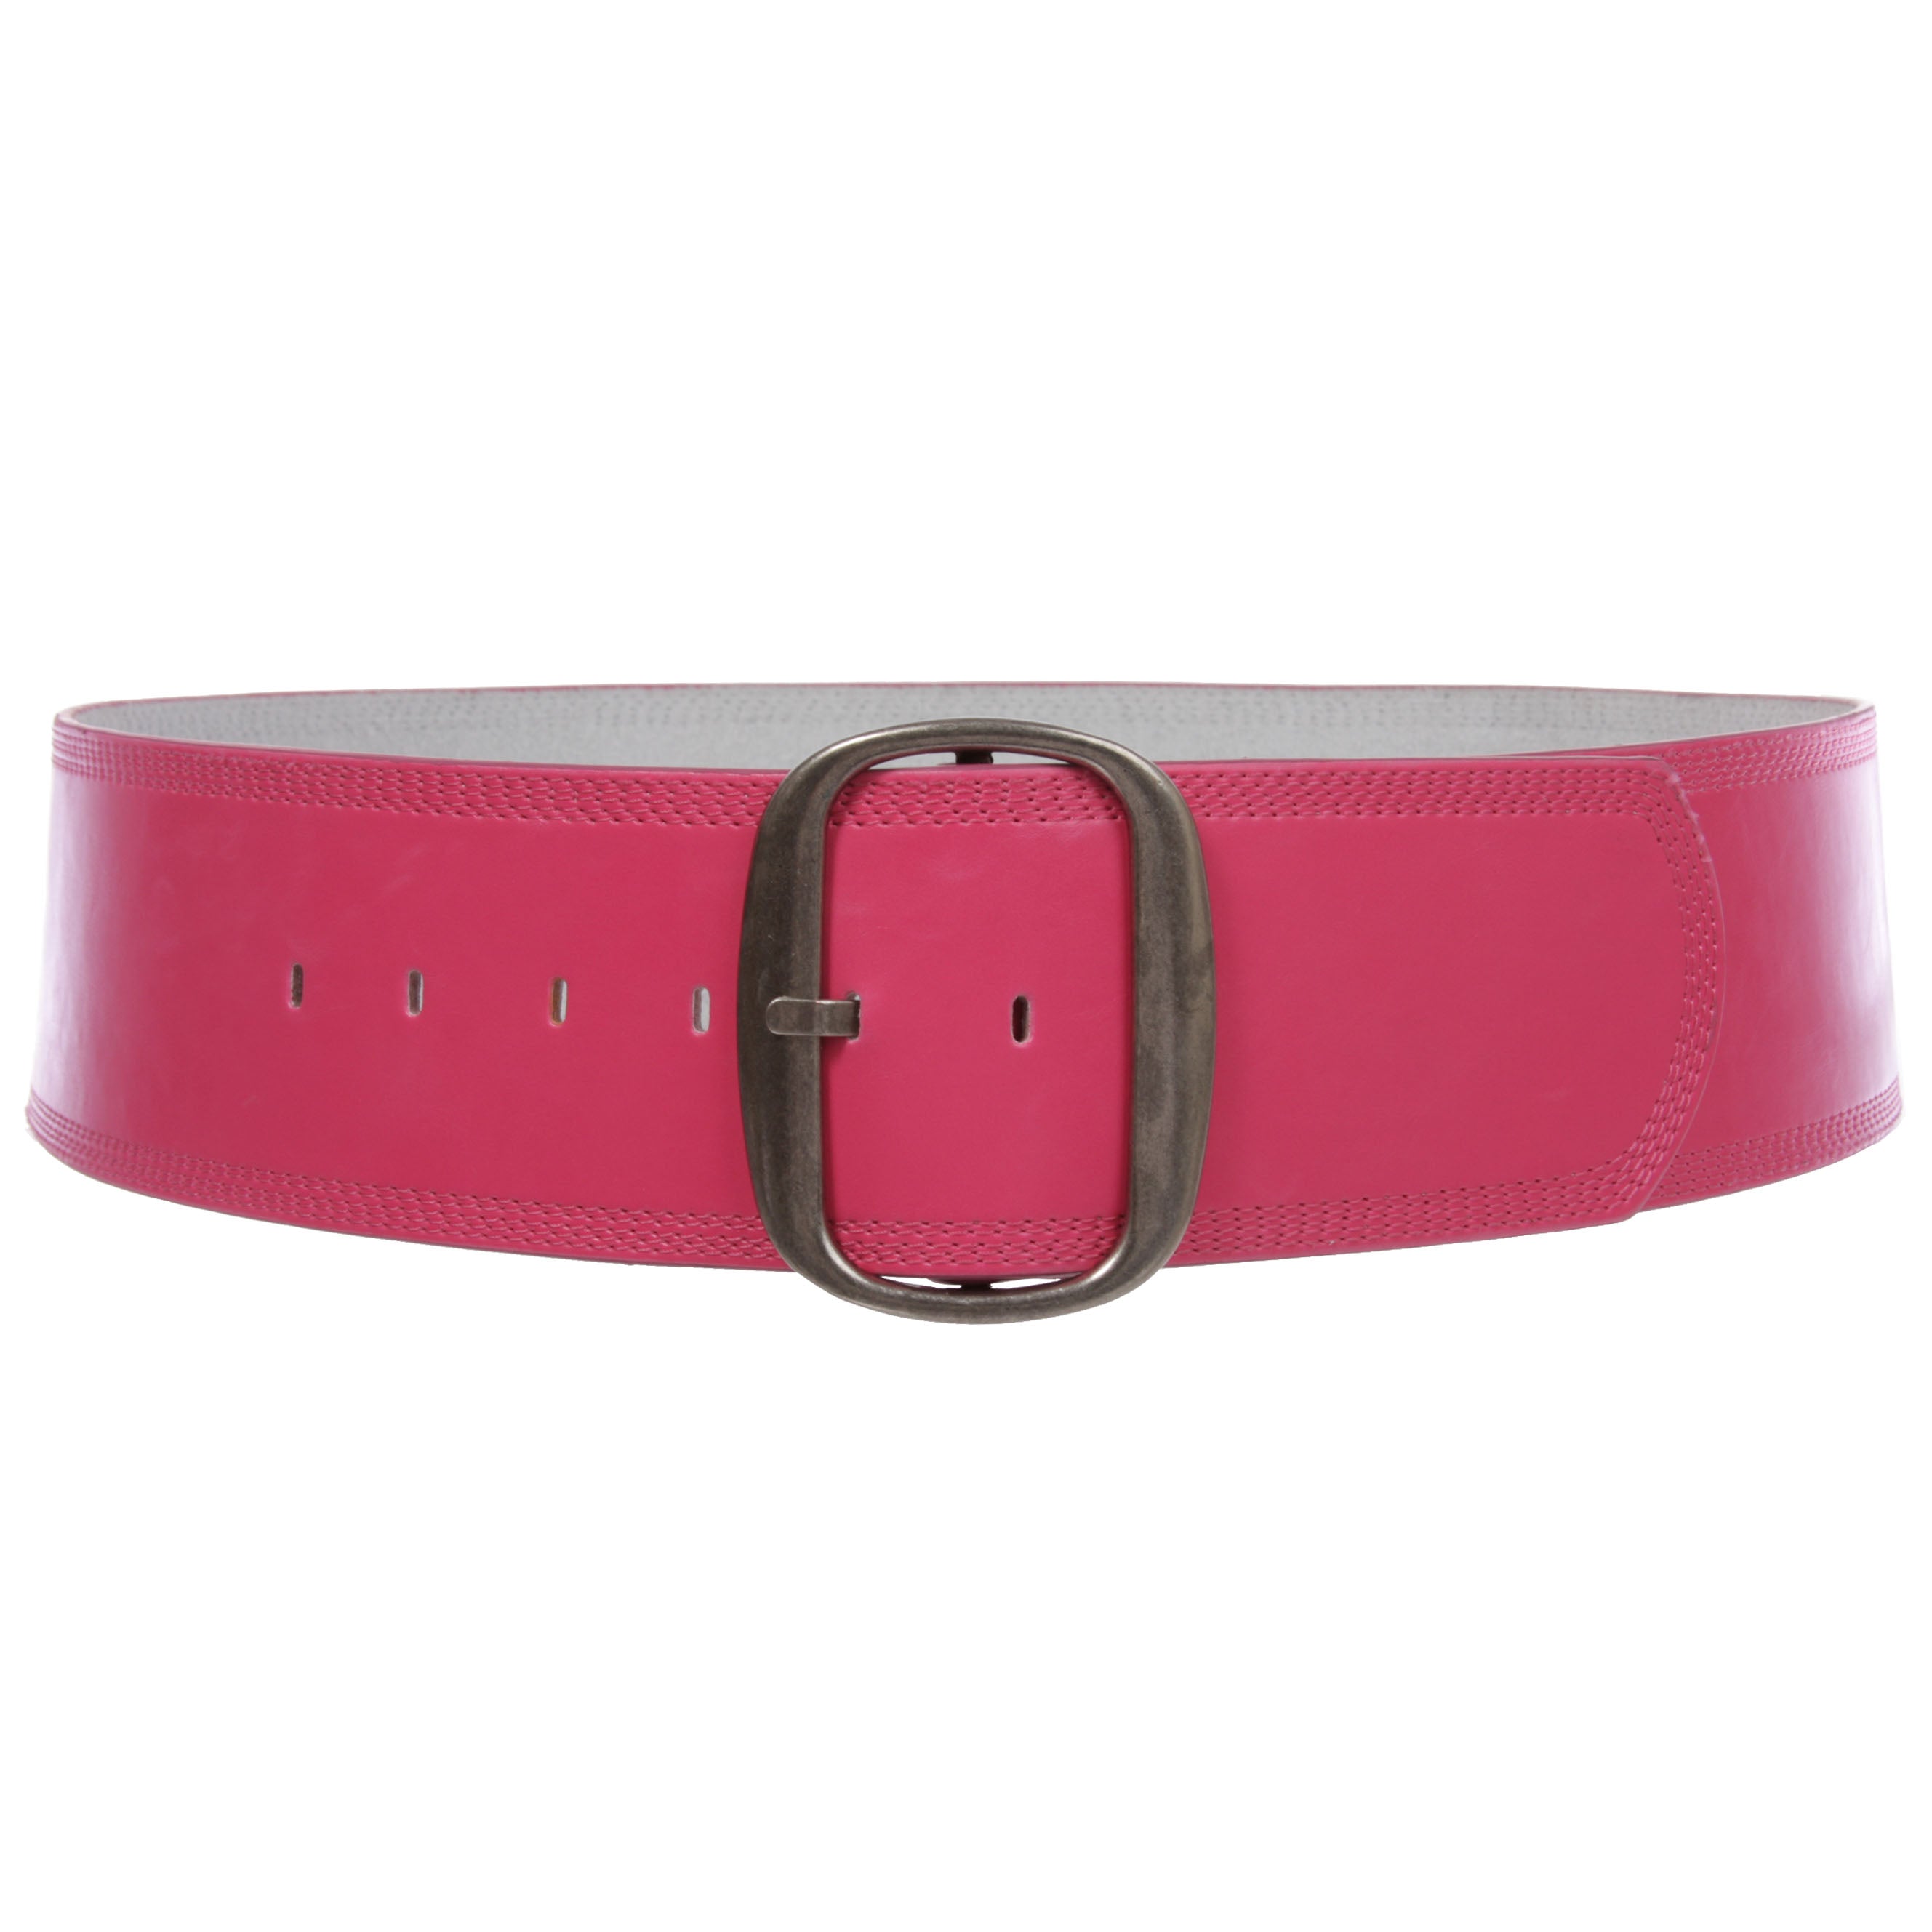 Women's 3" (75 mm) Wide Oval Tone-on-tone Stitching Edged Contour Belt